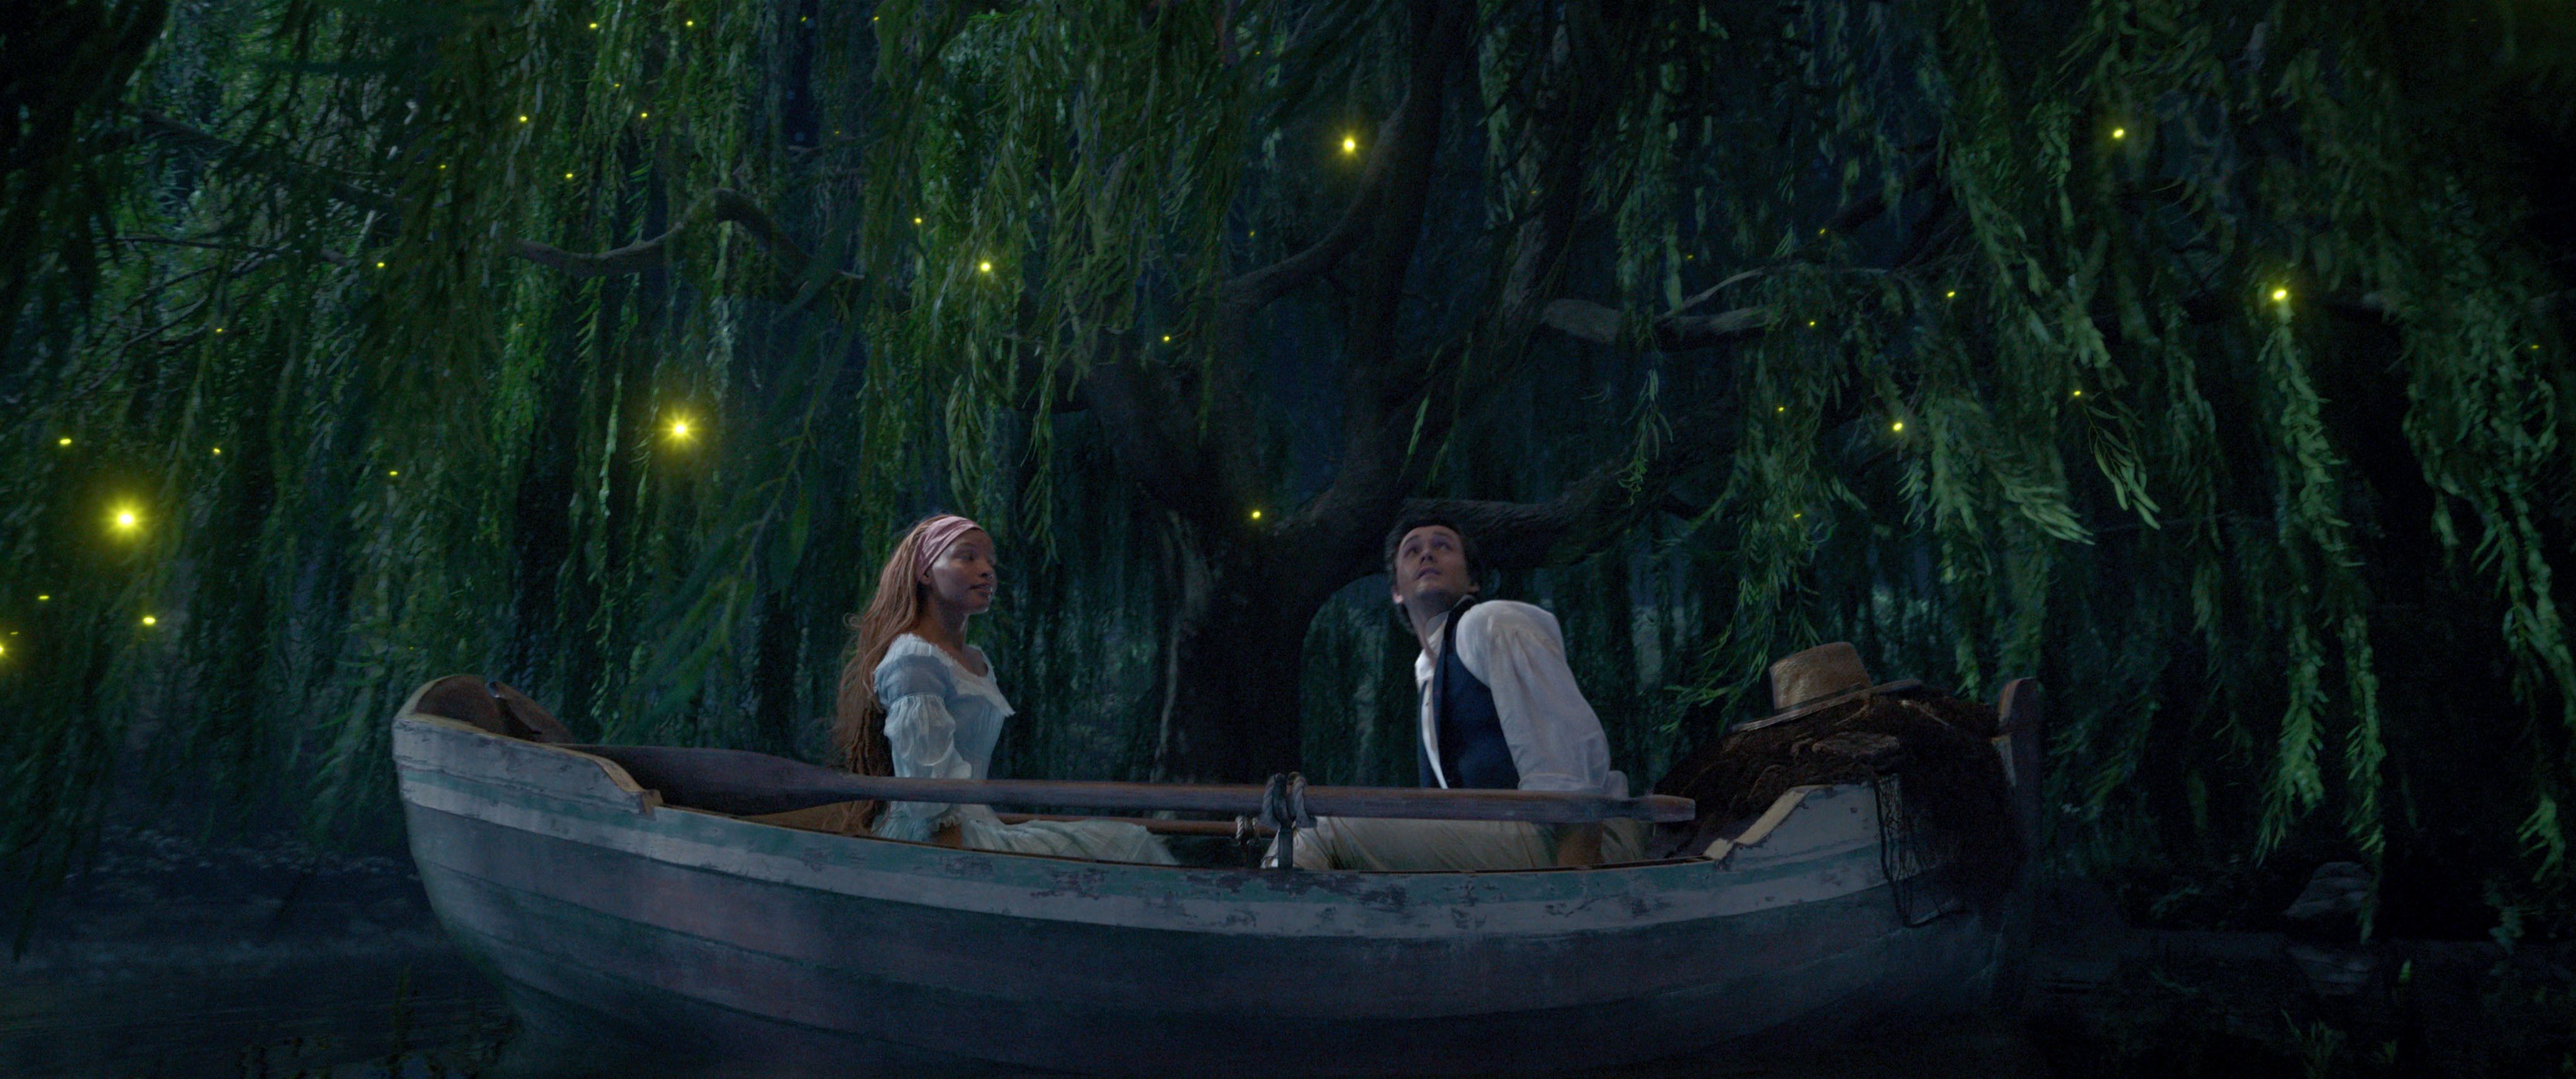 Disney's Live Action 'The Little Mermaid' Film: Release Date, Cast, & More